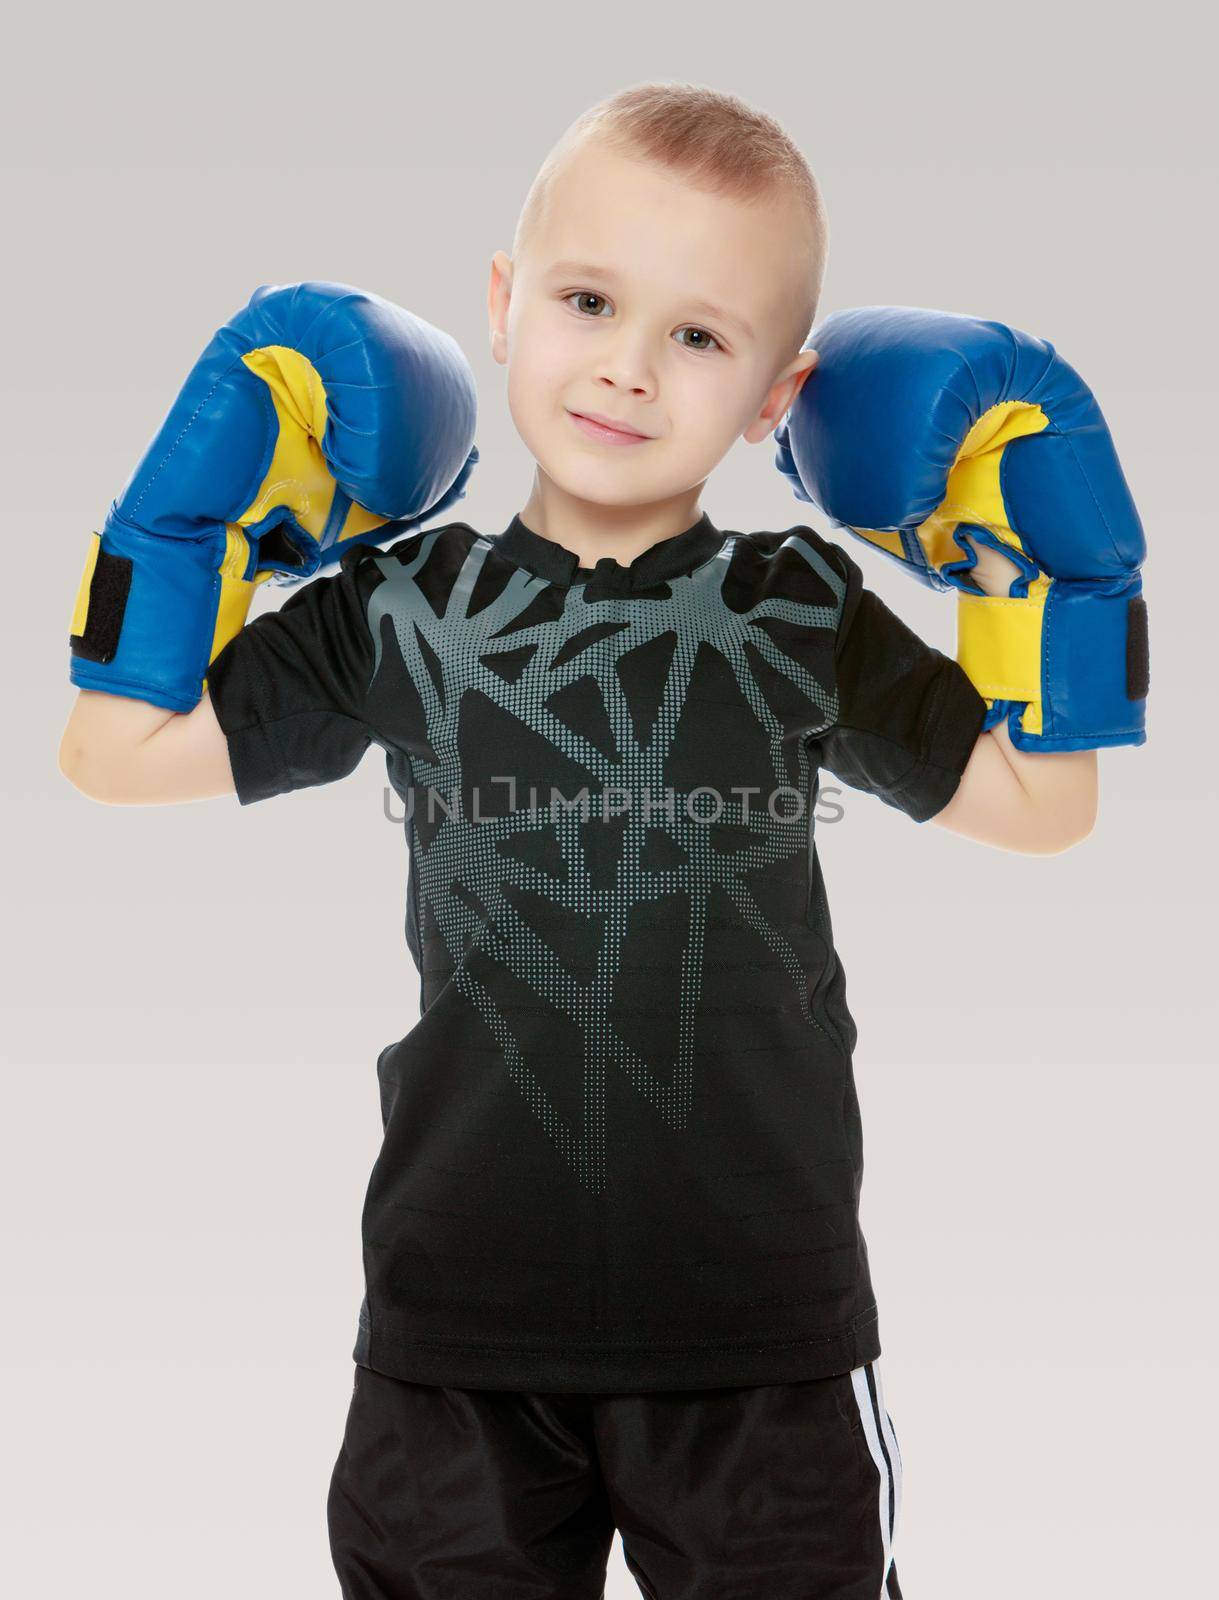 Cute little boy shows his Boxing gloves.On a gray background.